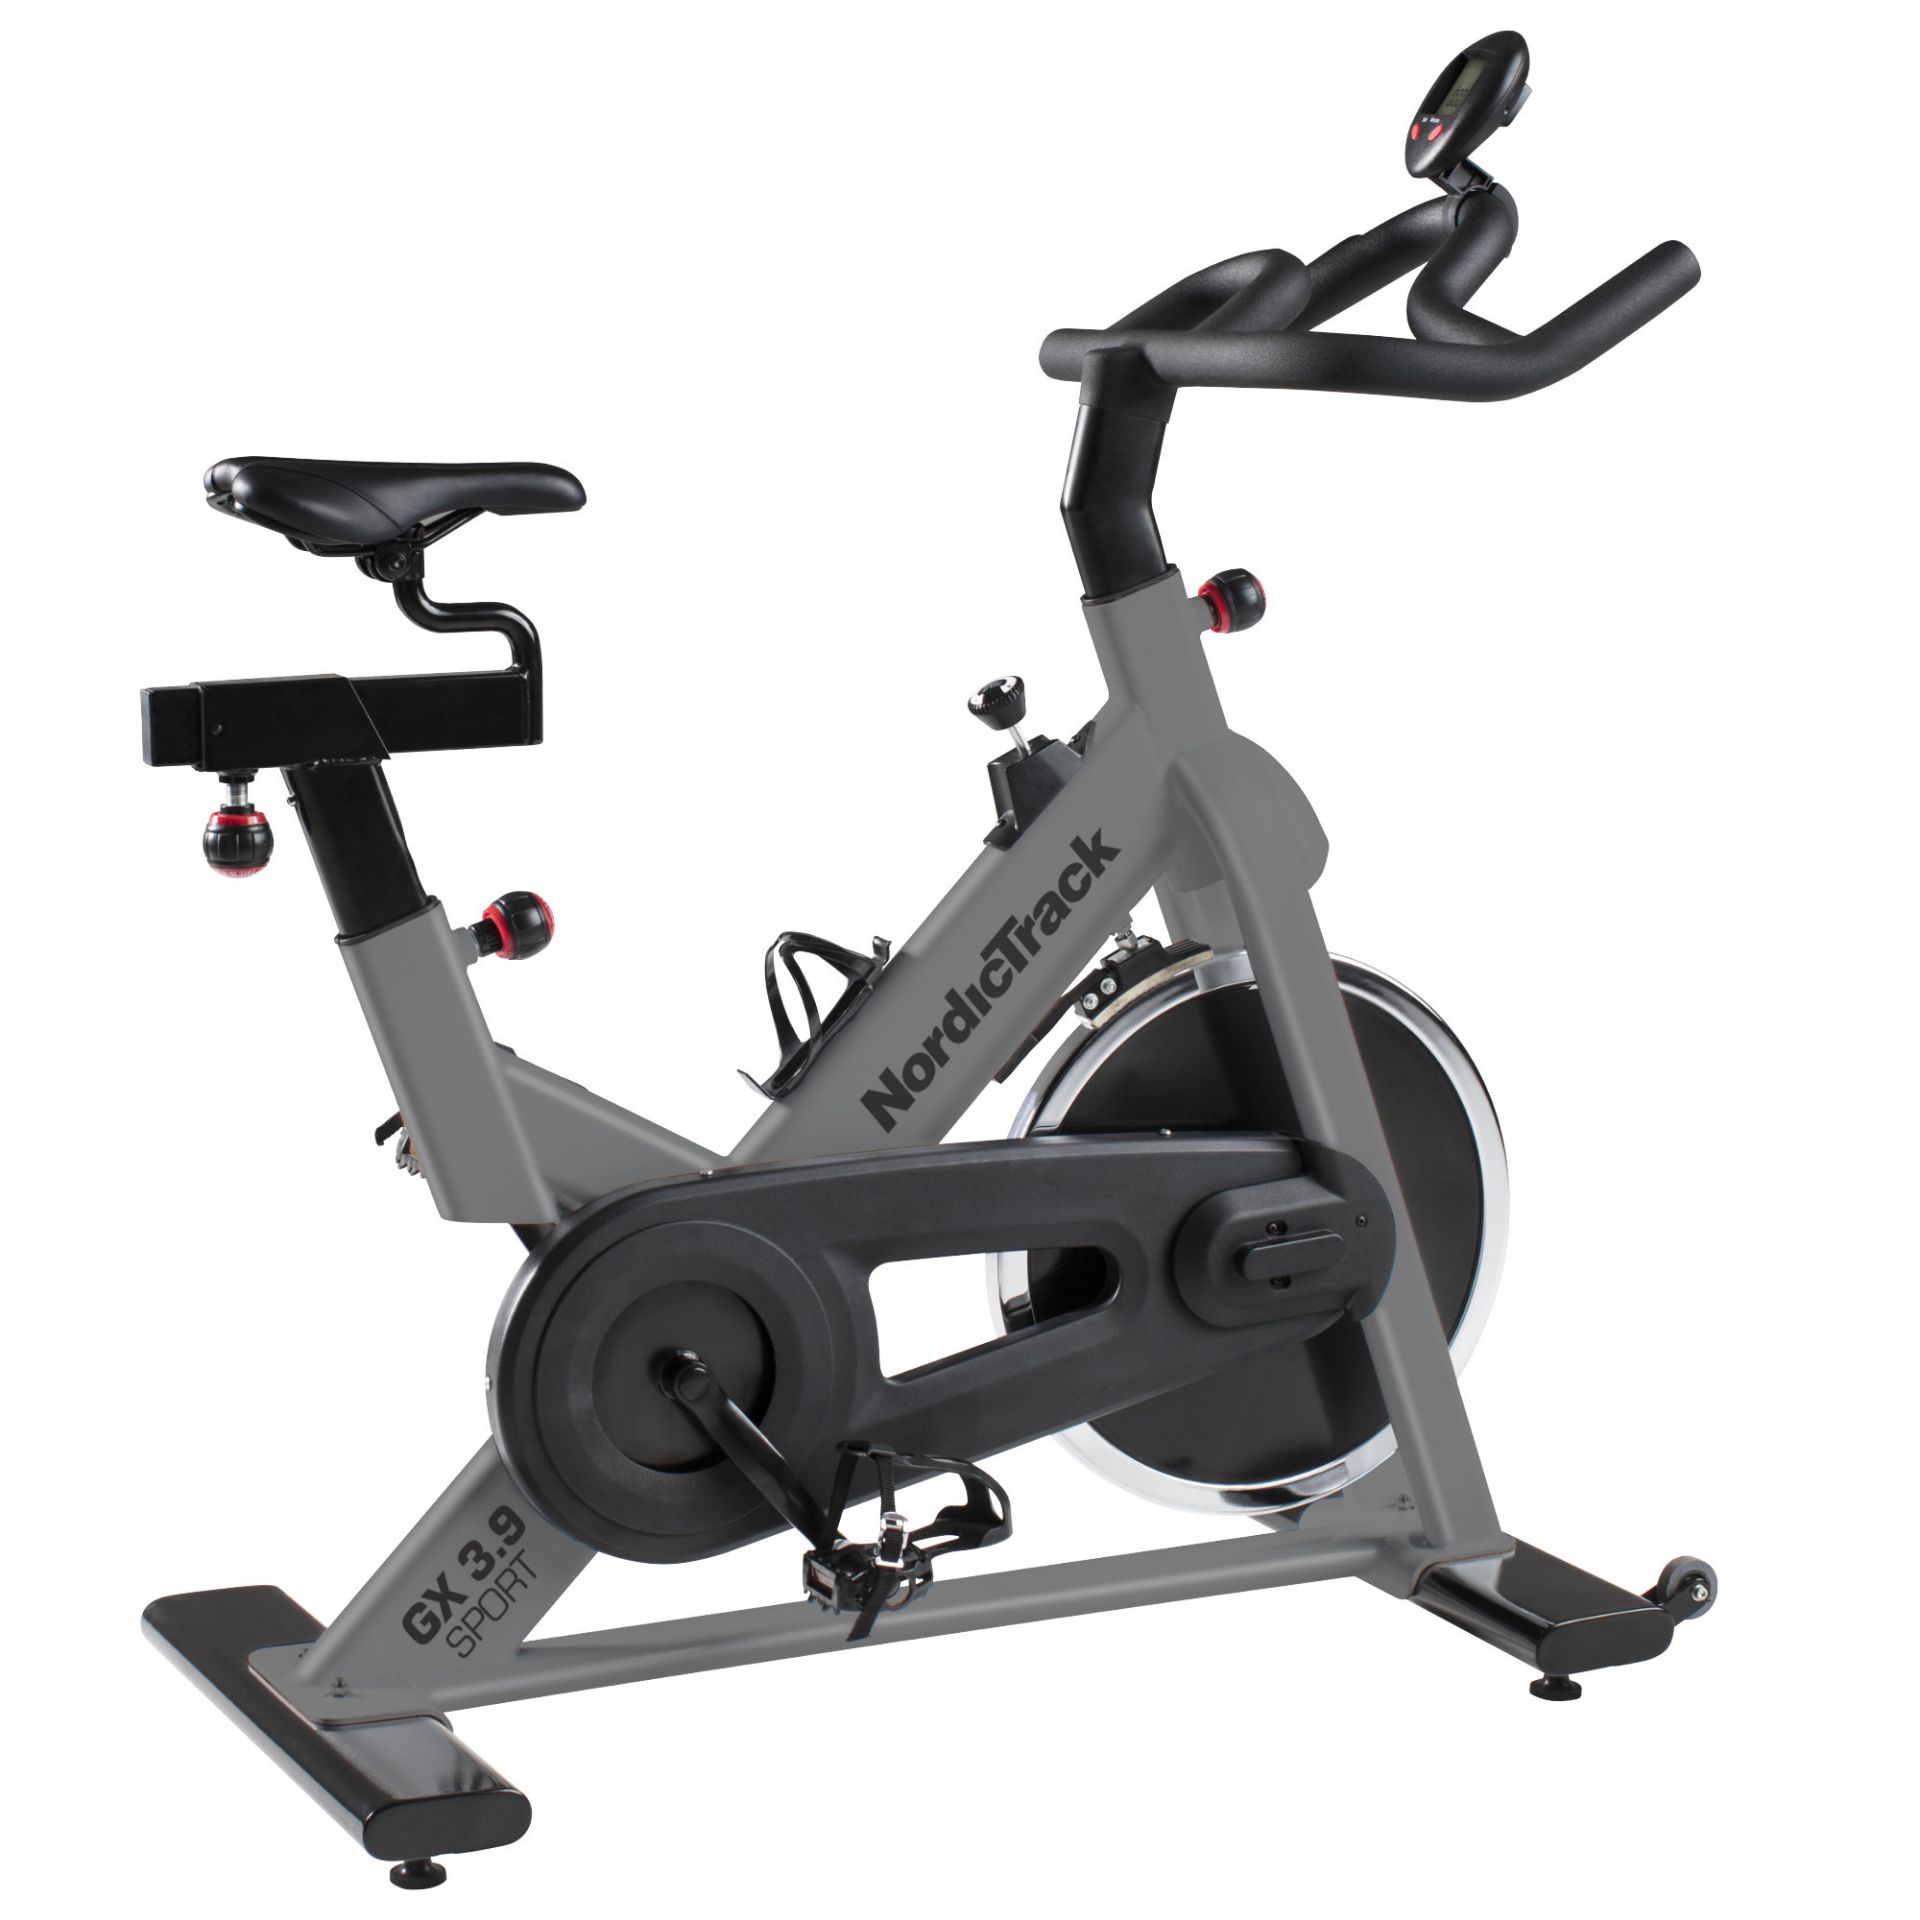 1 NORDIC TRACK GX 3.9 SPORT INDOOR CYCLE RRP Â£499 (GENERIC IMAGE GUIDE)